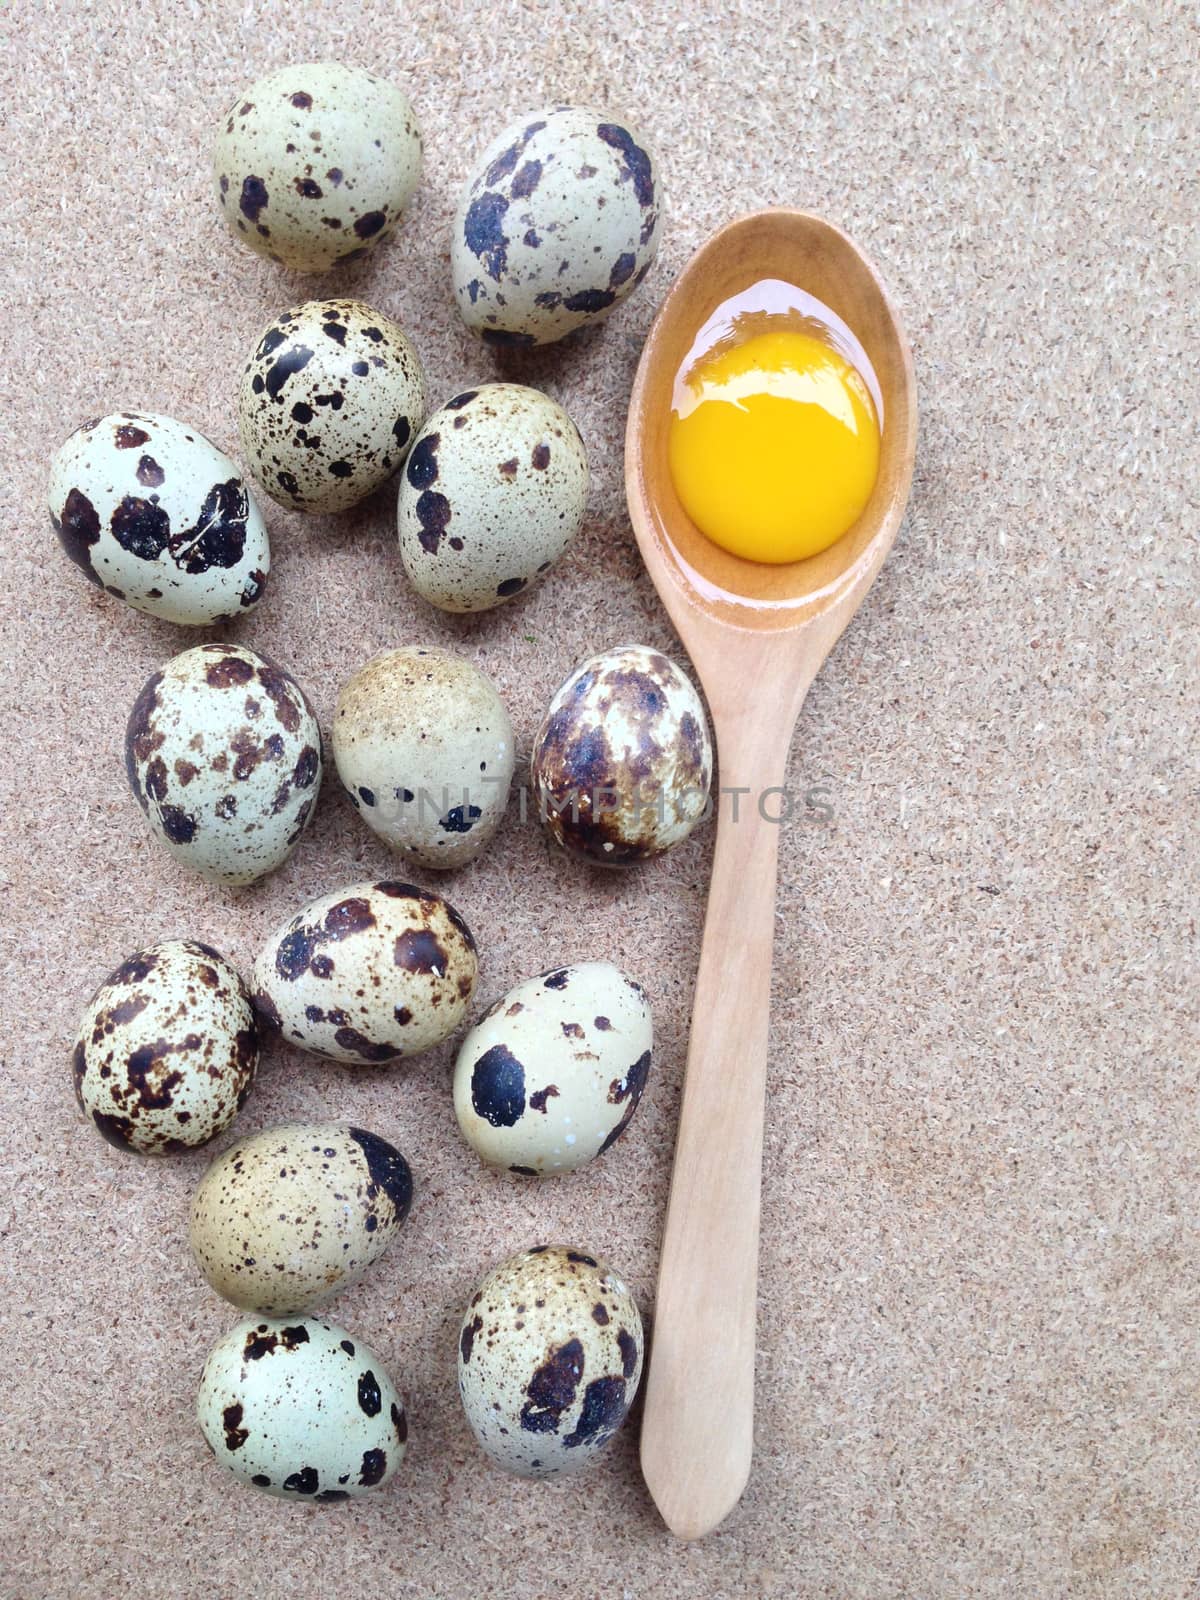 Quail eggs with yolk in wooden spoon on plywood by Bowonpat